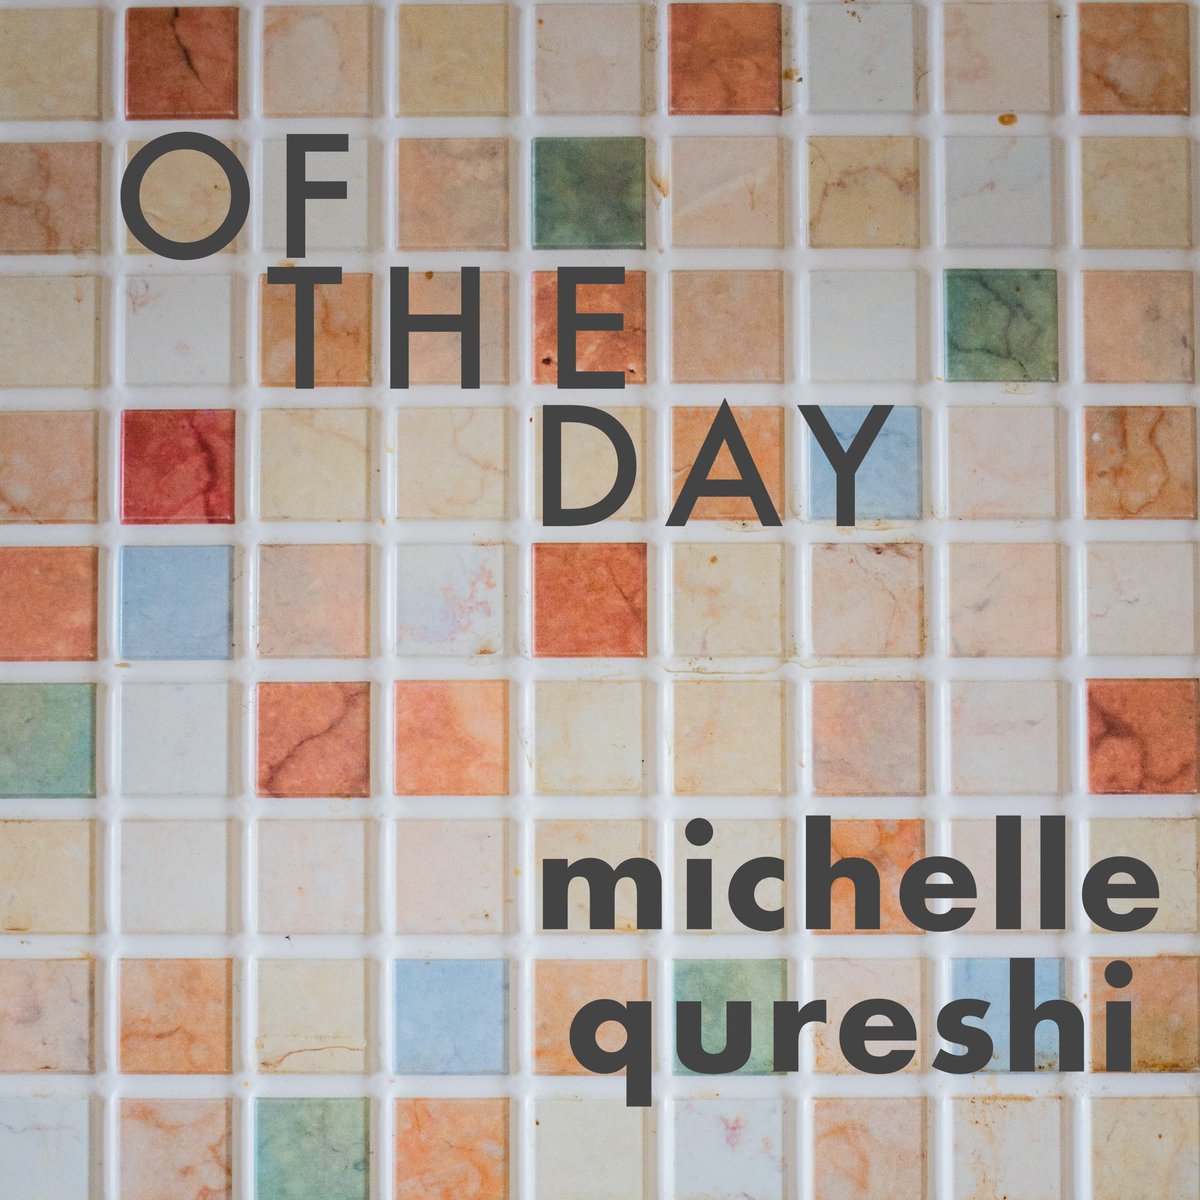 Just got an awesome review for the single dropping this Friday! Of the Day (single) by Michelle Qureshi - Album Review | MainlyPiano.com mainlypiano.com/reviews/michel… thank you Kathy Parsons